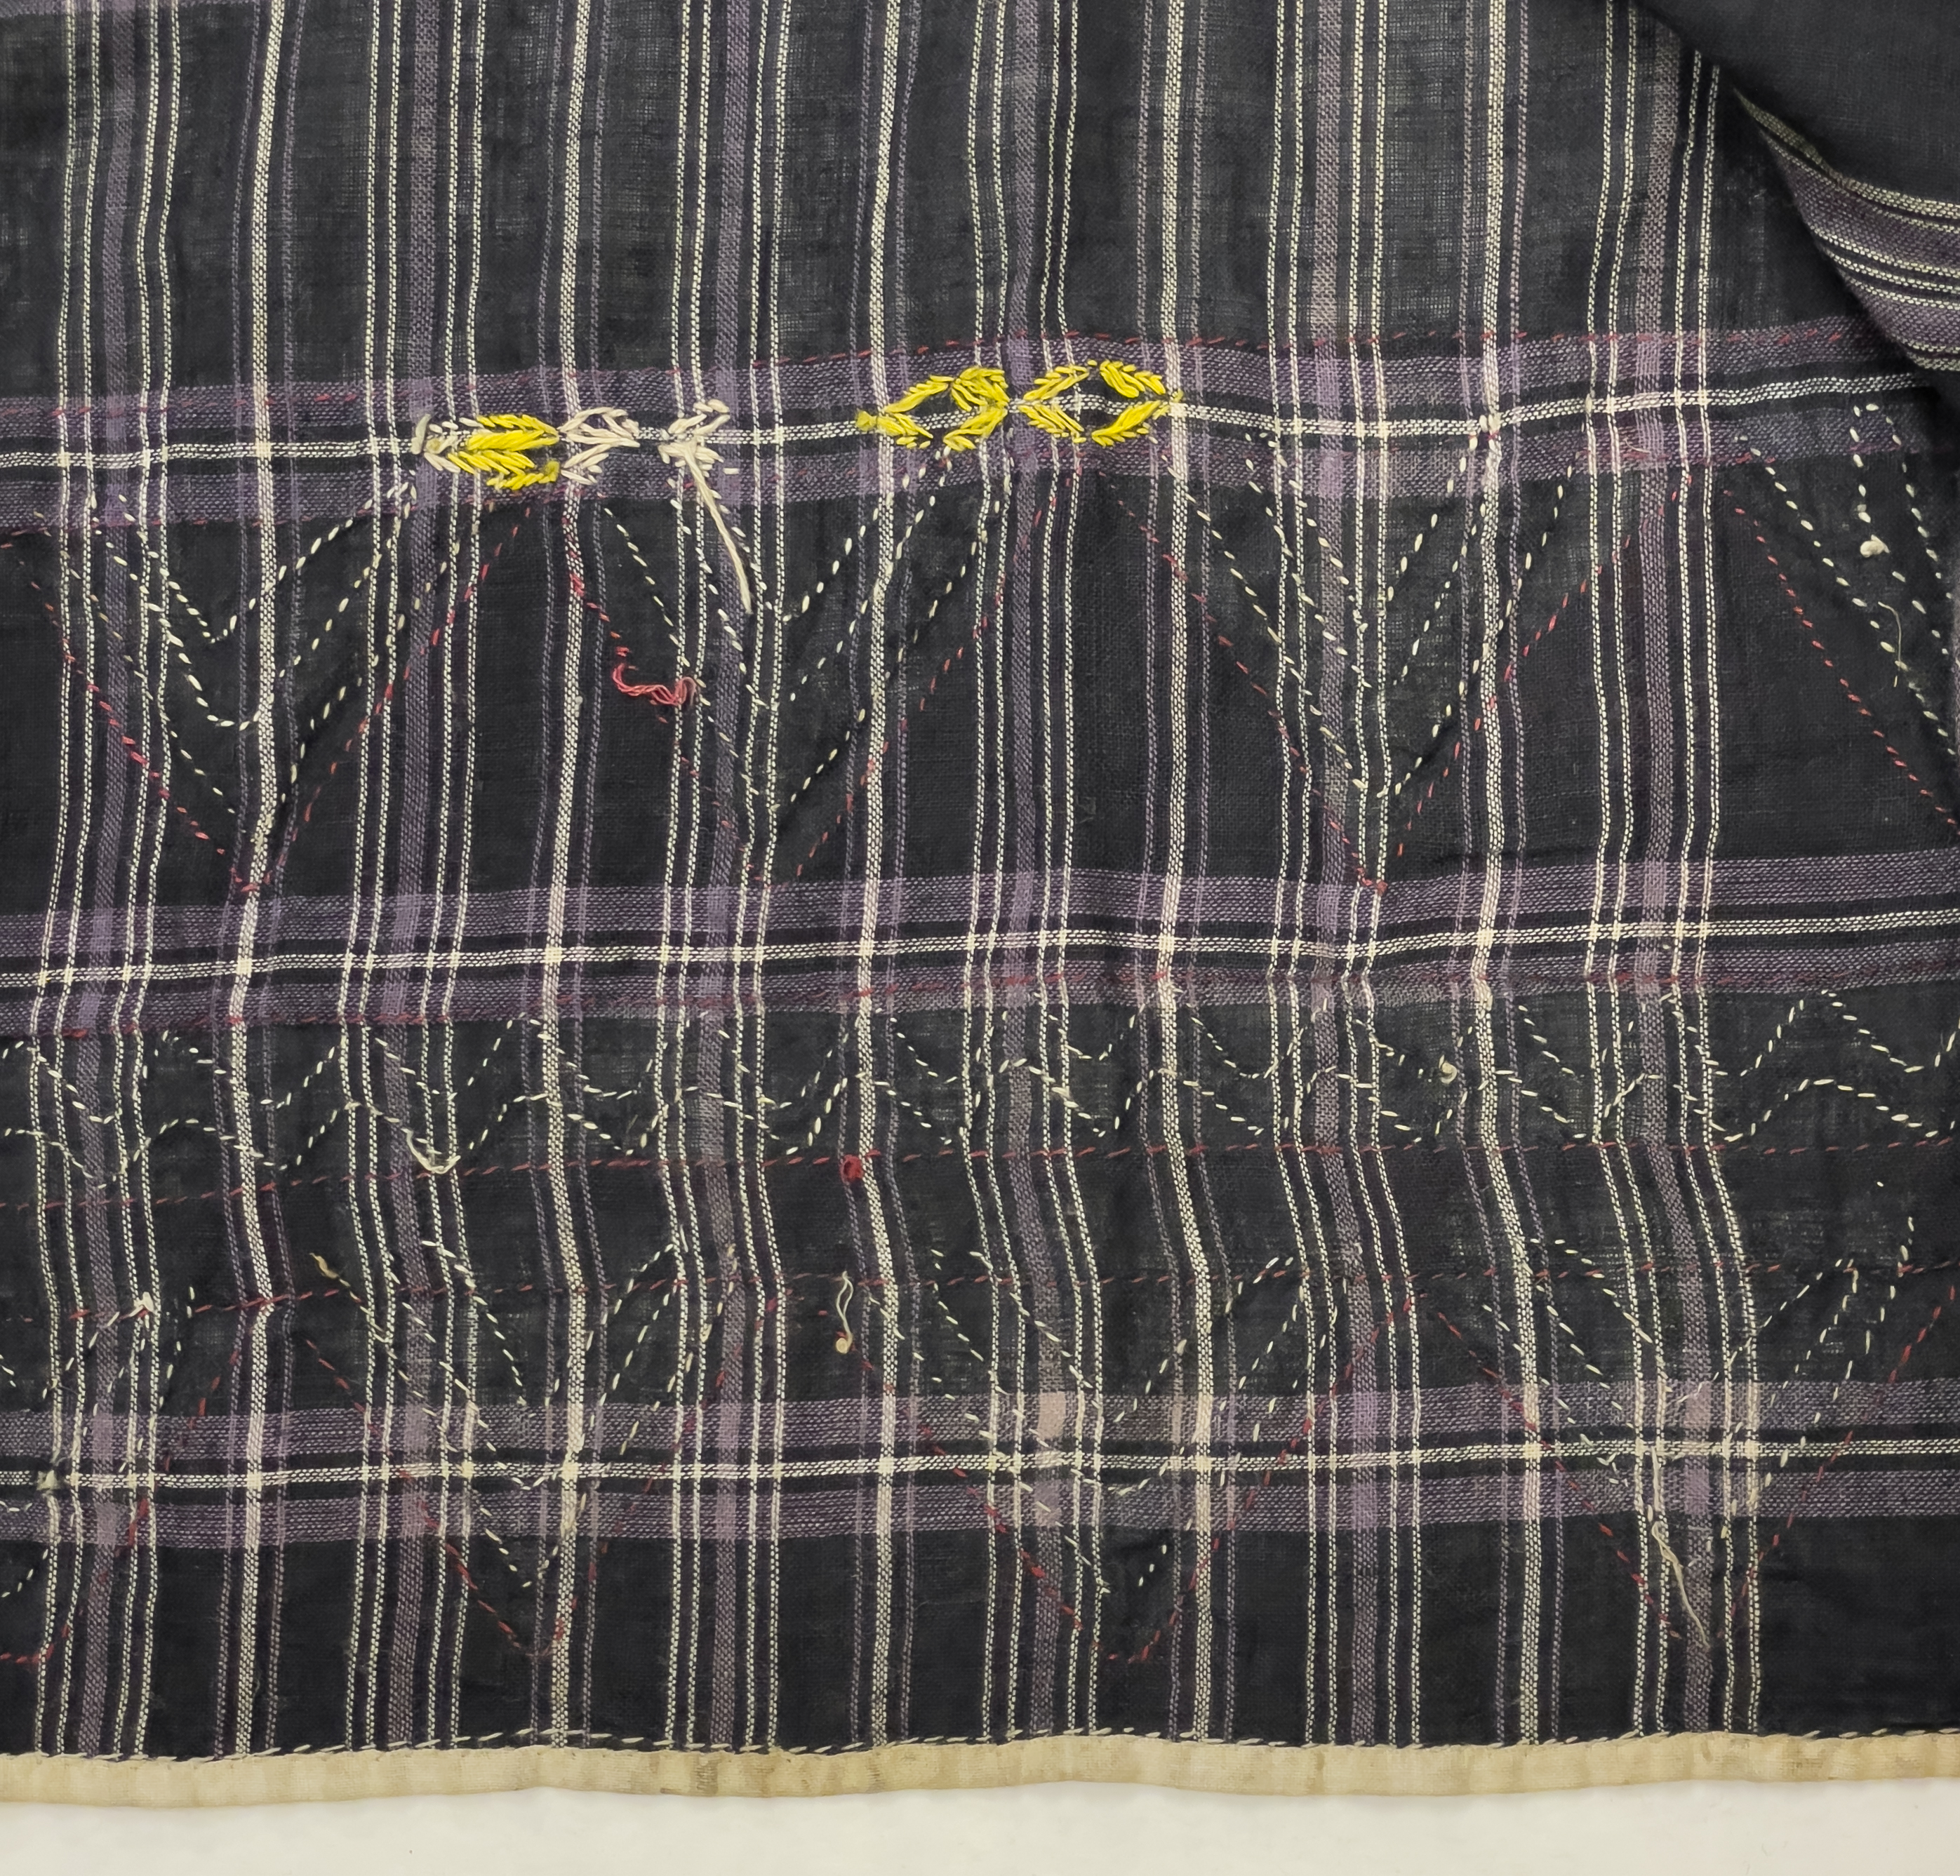 detail view of hem interior (c) Field Museum of Natural History - CC BY-NC 4.0